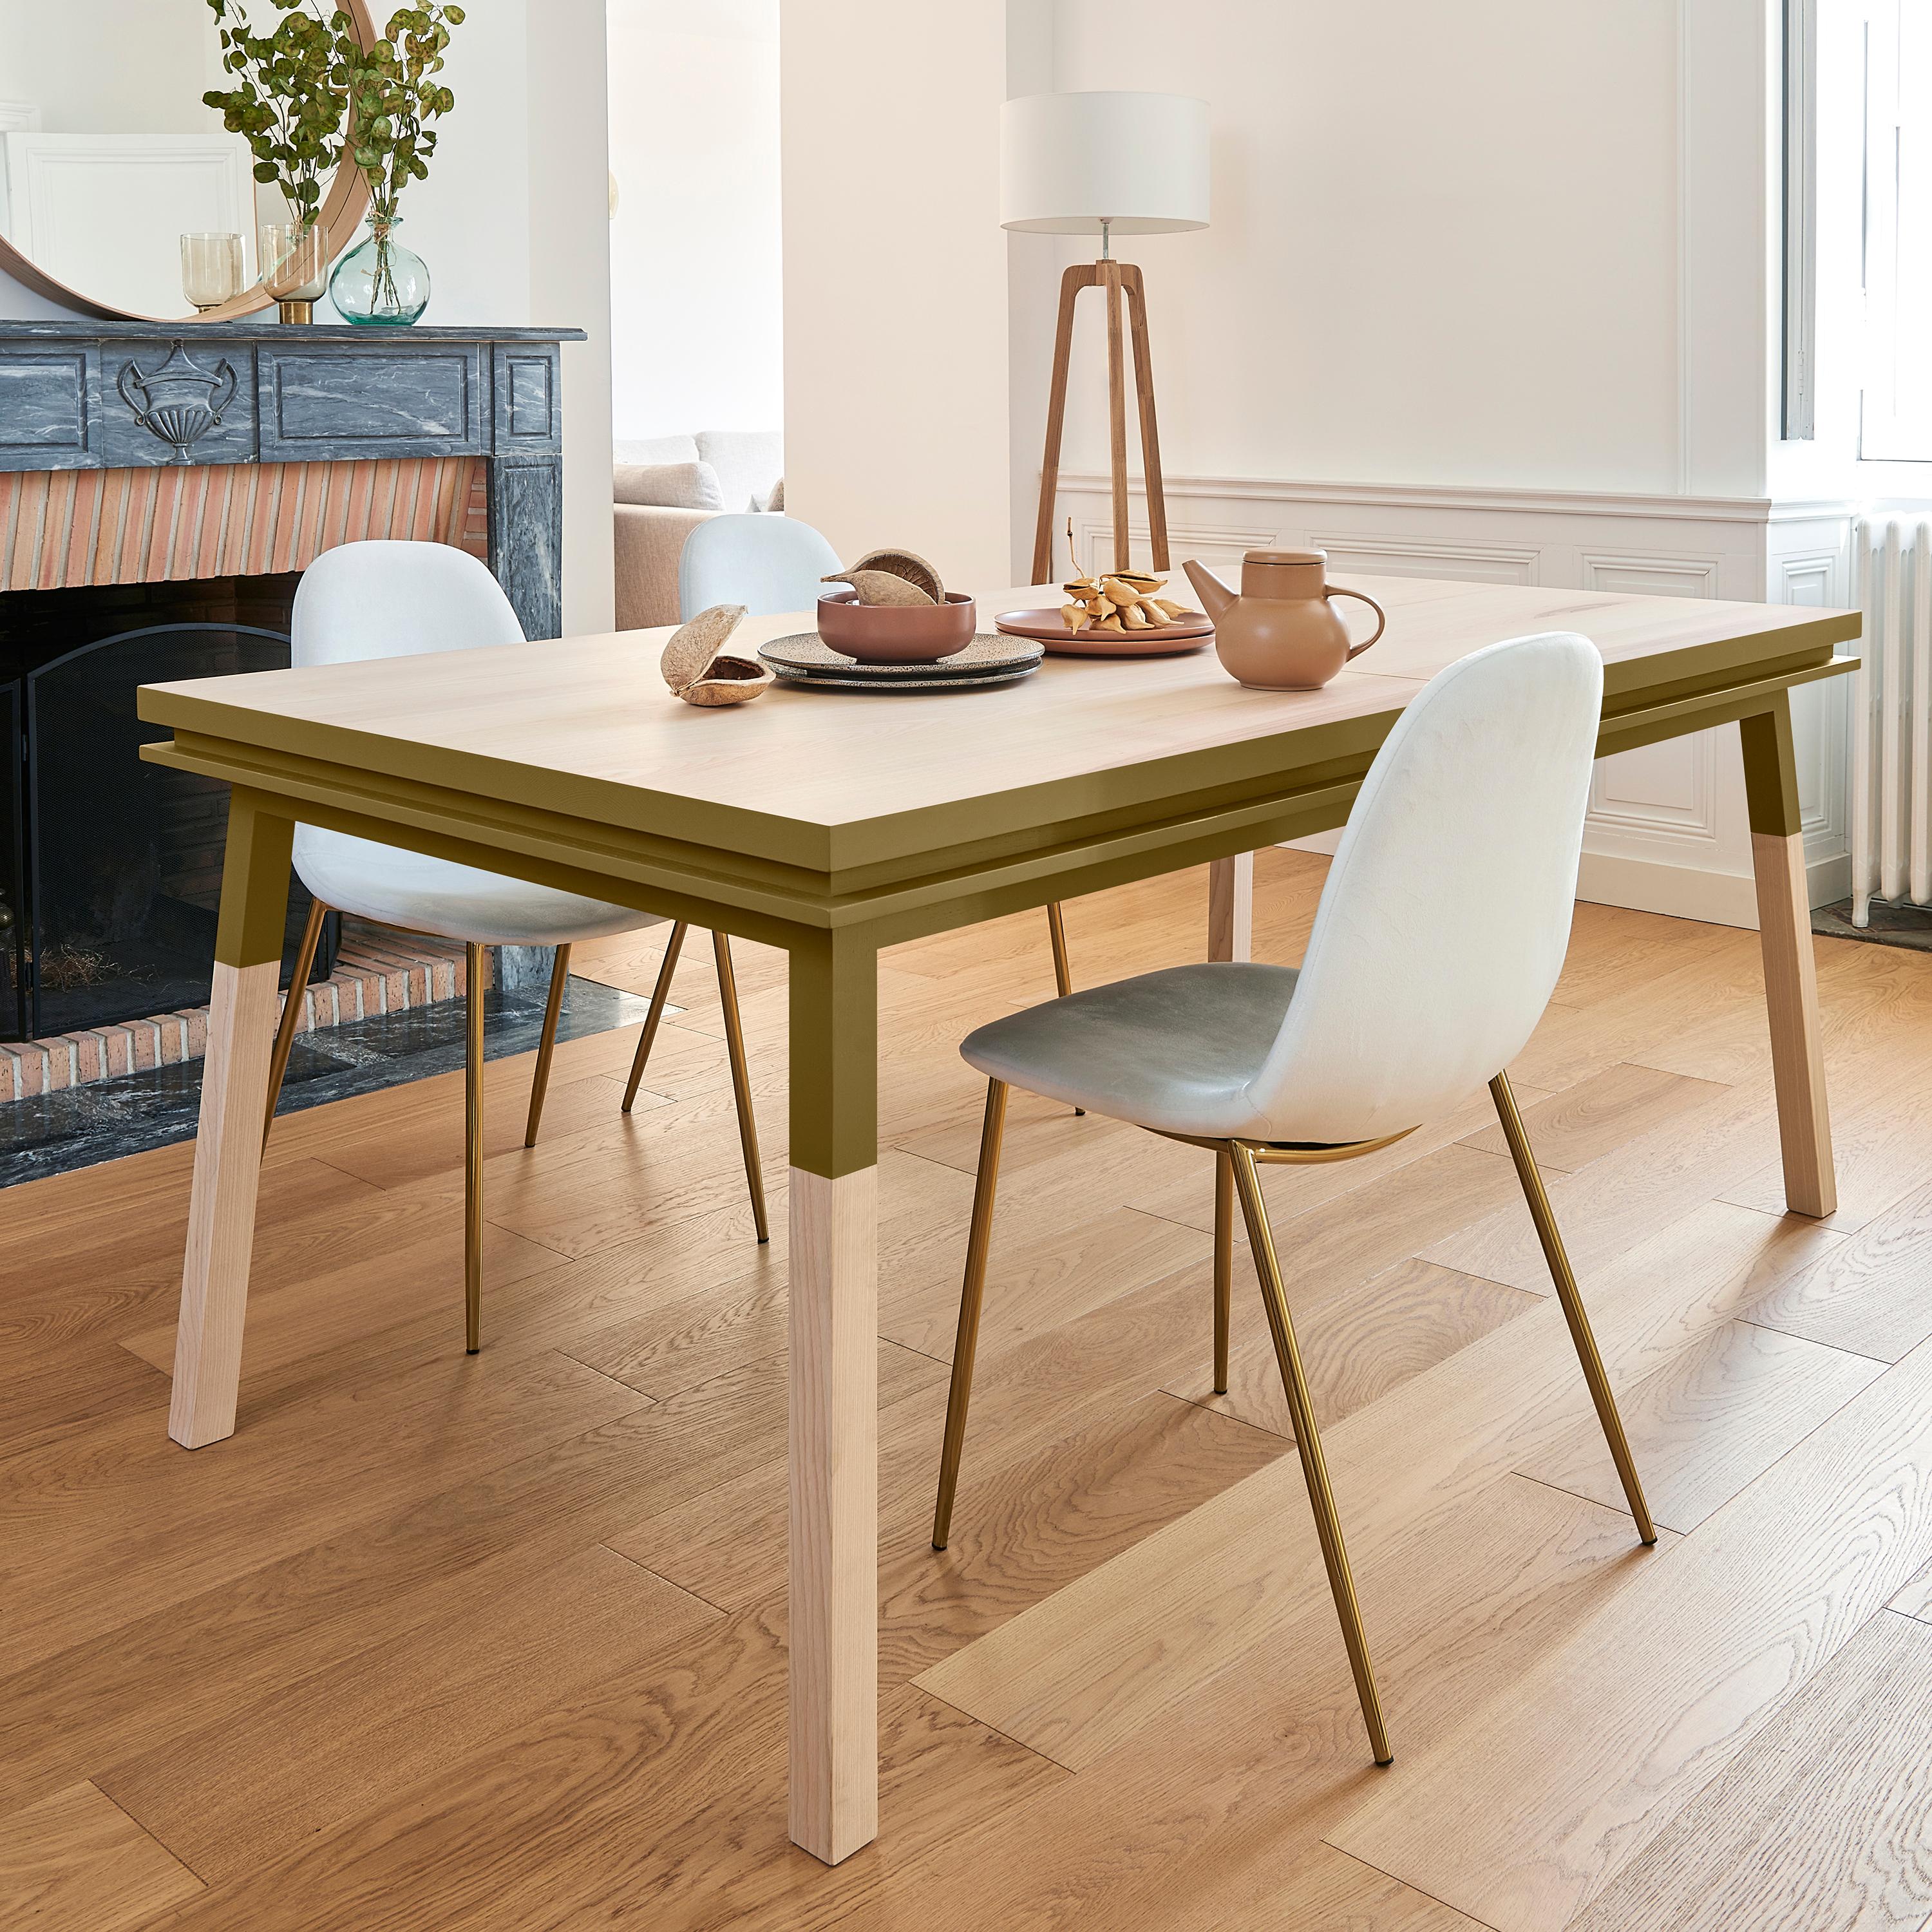 This rectangular dining table is proposed with 1 integrated and folded extension. 

It is made of 100% solid ash wood from sustainably managed and PEFC certified French forests.

The 3 lengths are 140 cm / 55.1 in when the table is closed, 180